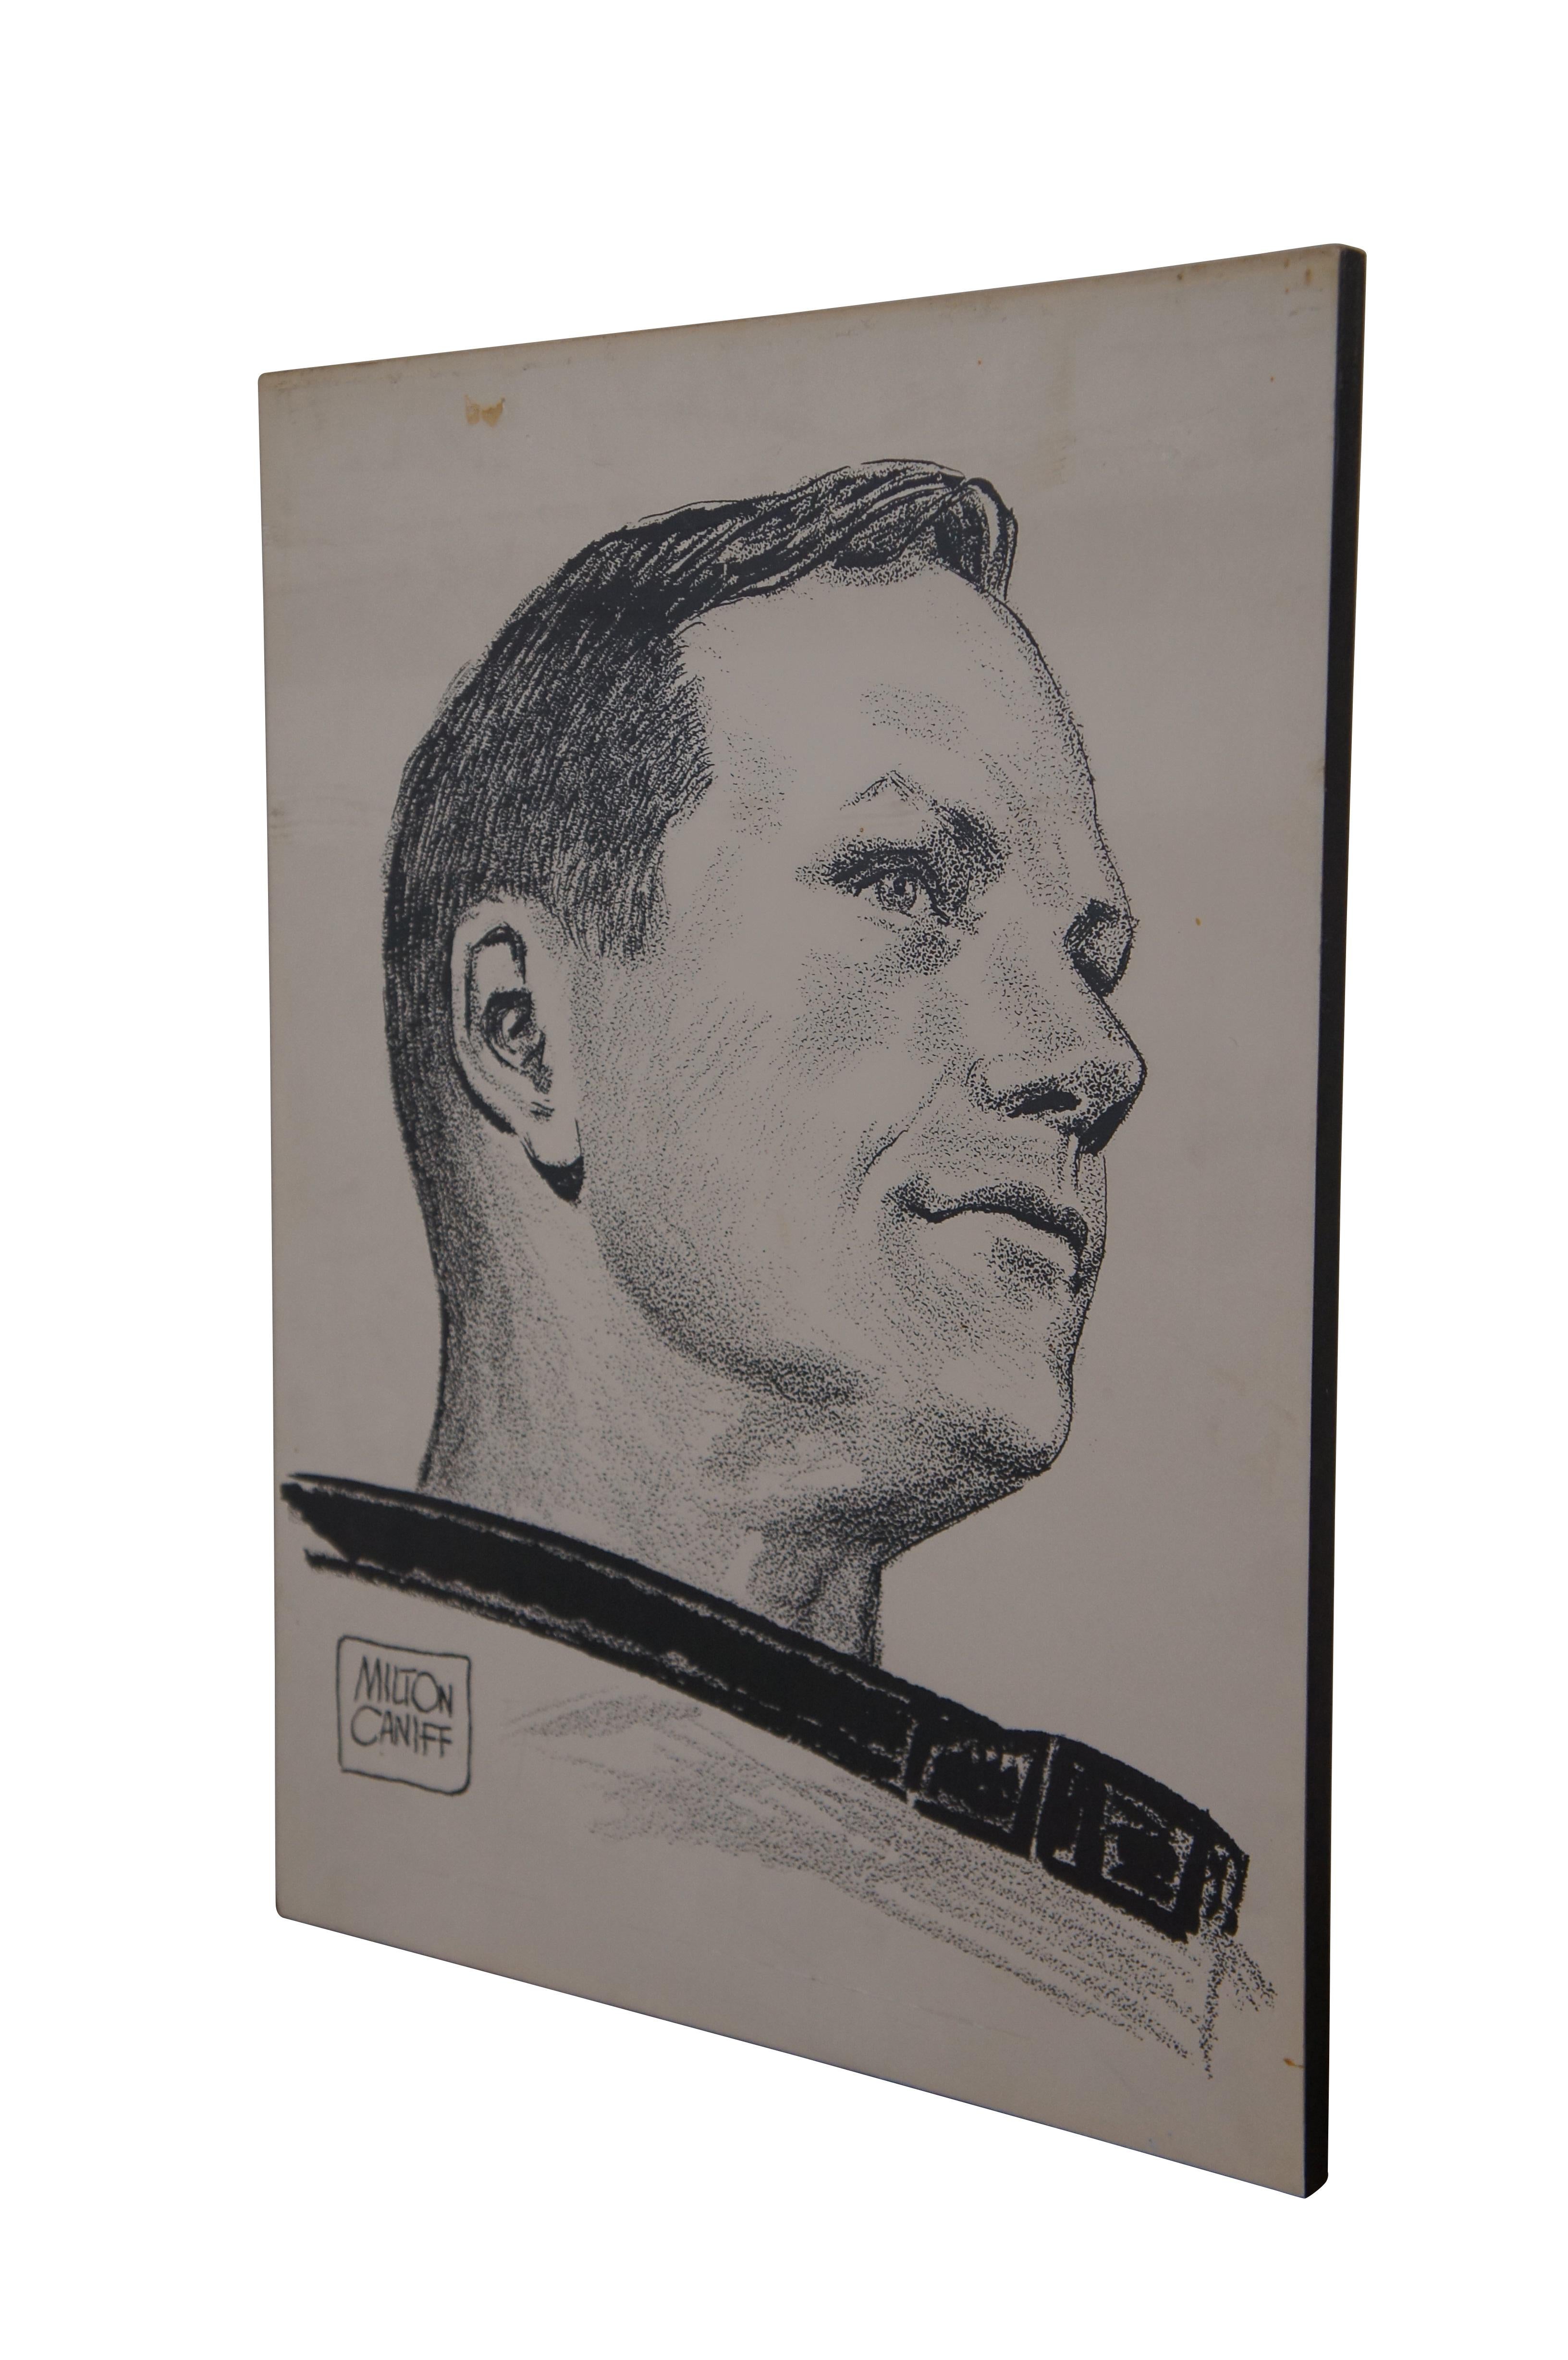 Vintage Milton Caniff Neil Armstrong portrait print on board.  

Neil and Caniff never met, but their stories managed to intersect in other ways.  It's no surprise that this aviation legend would have connections to Milton Caniff, aviation's biggest